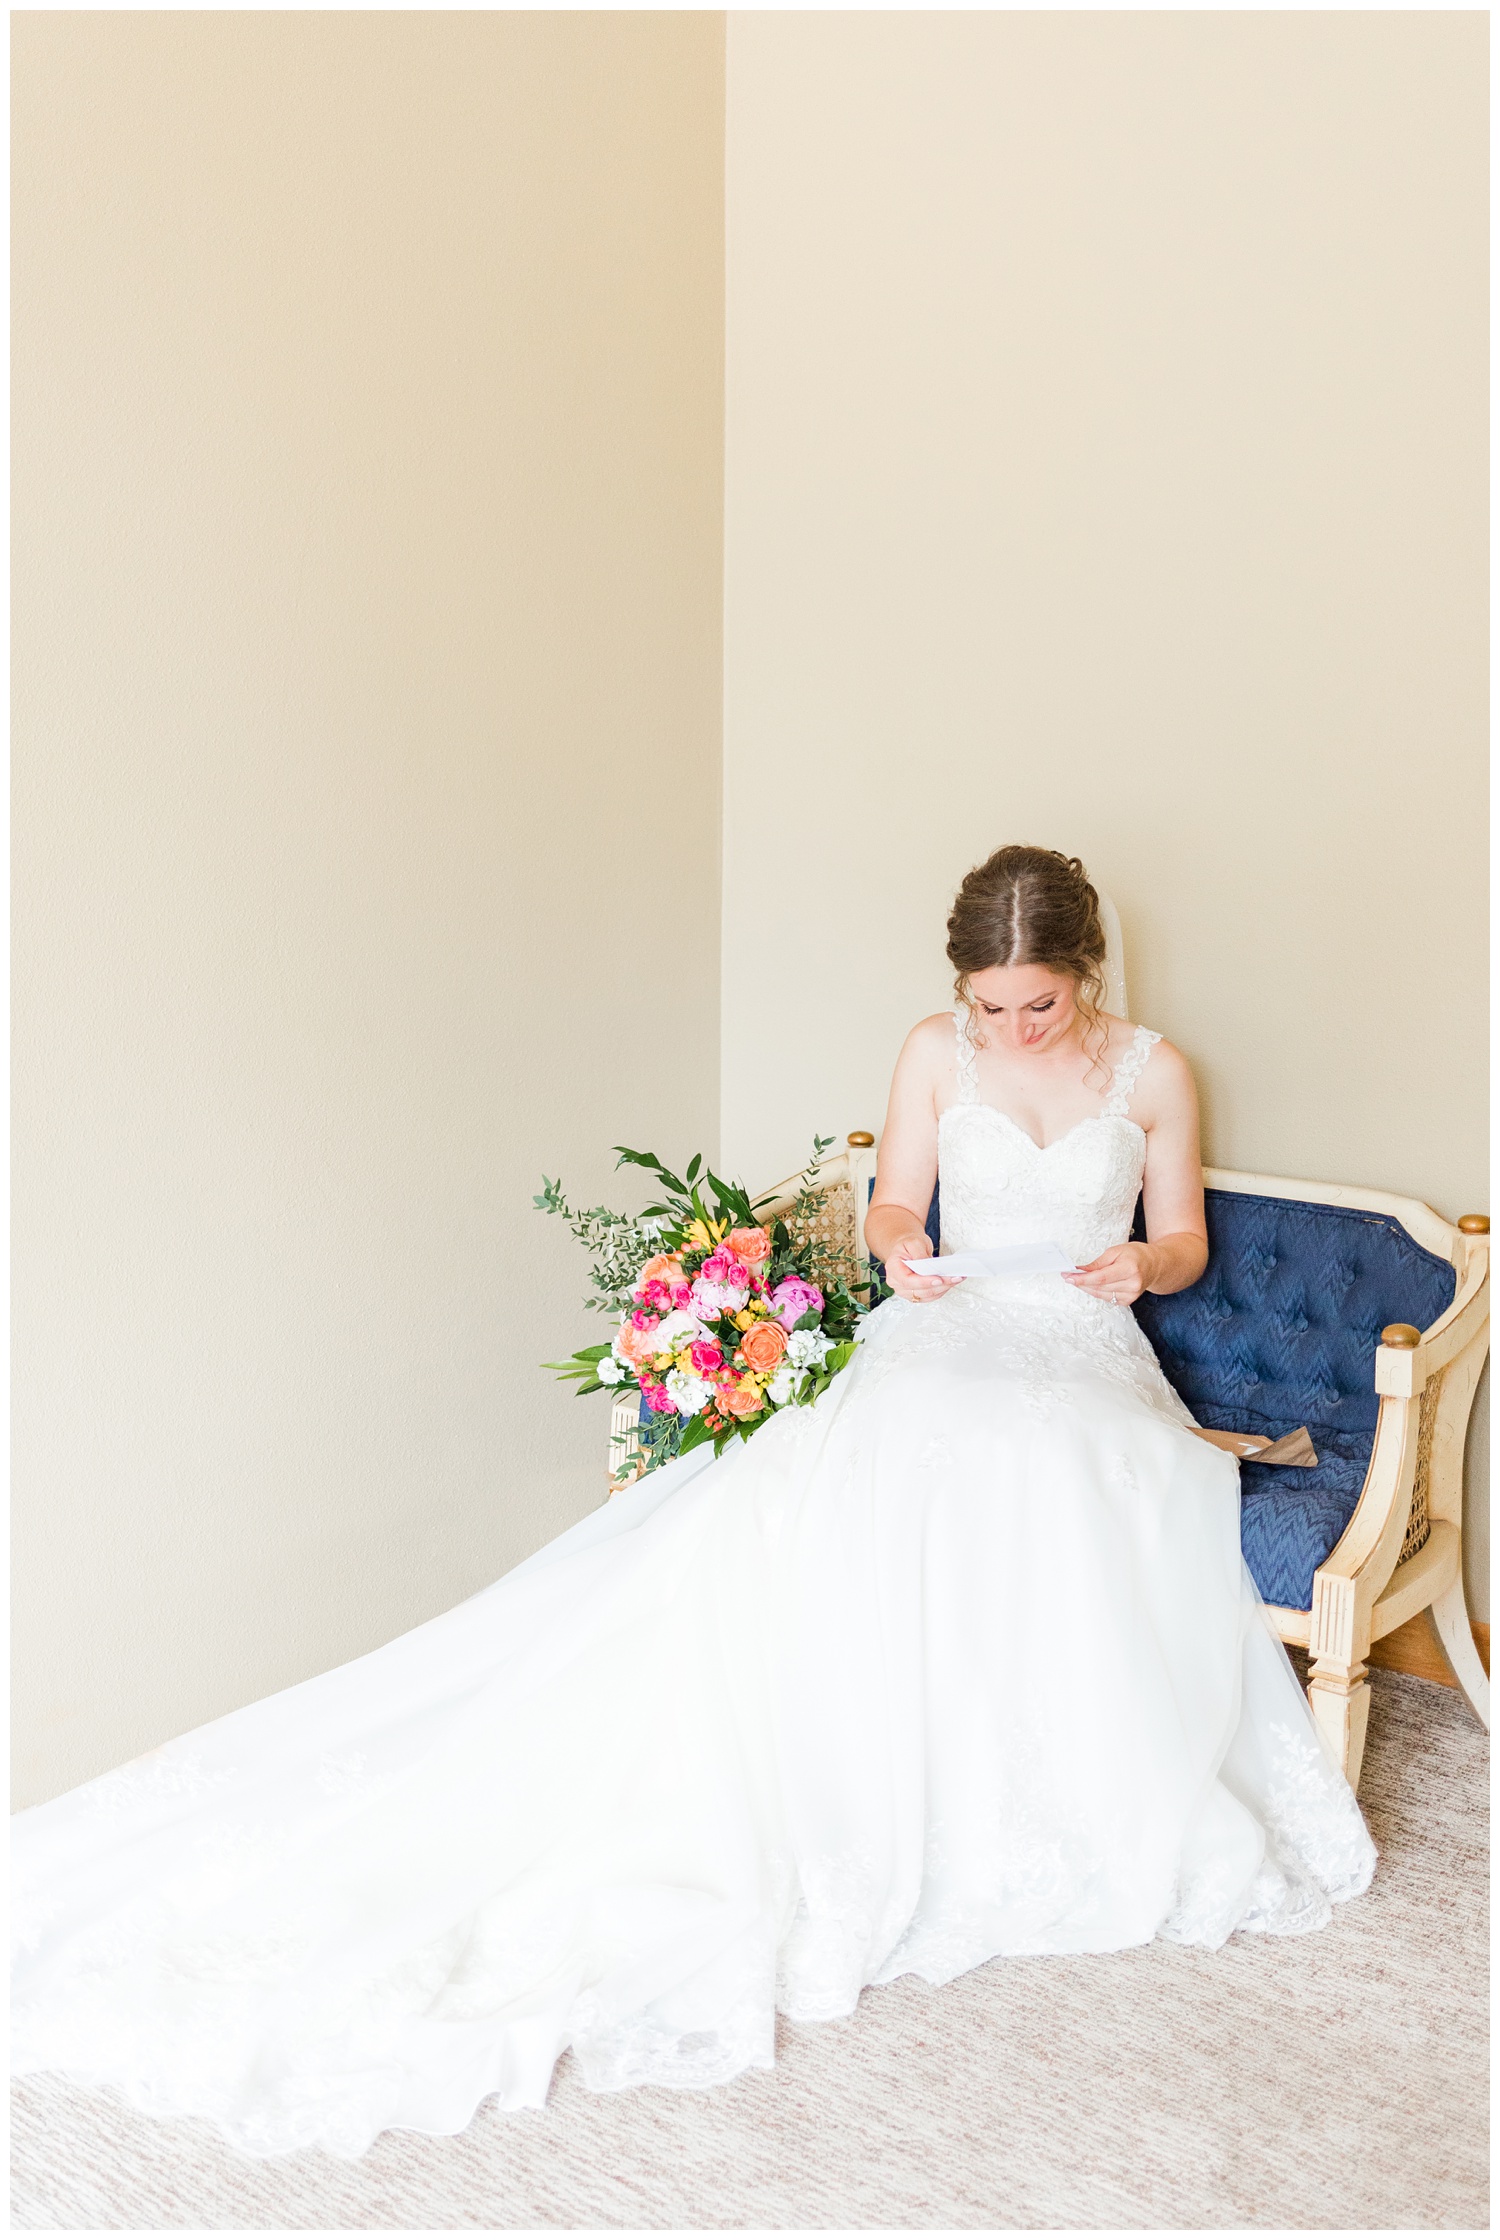 Leslie sits on an antique setae and reads a private letter from her groom as she gets ready for her wedding day | CB Studio